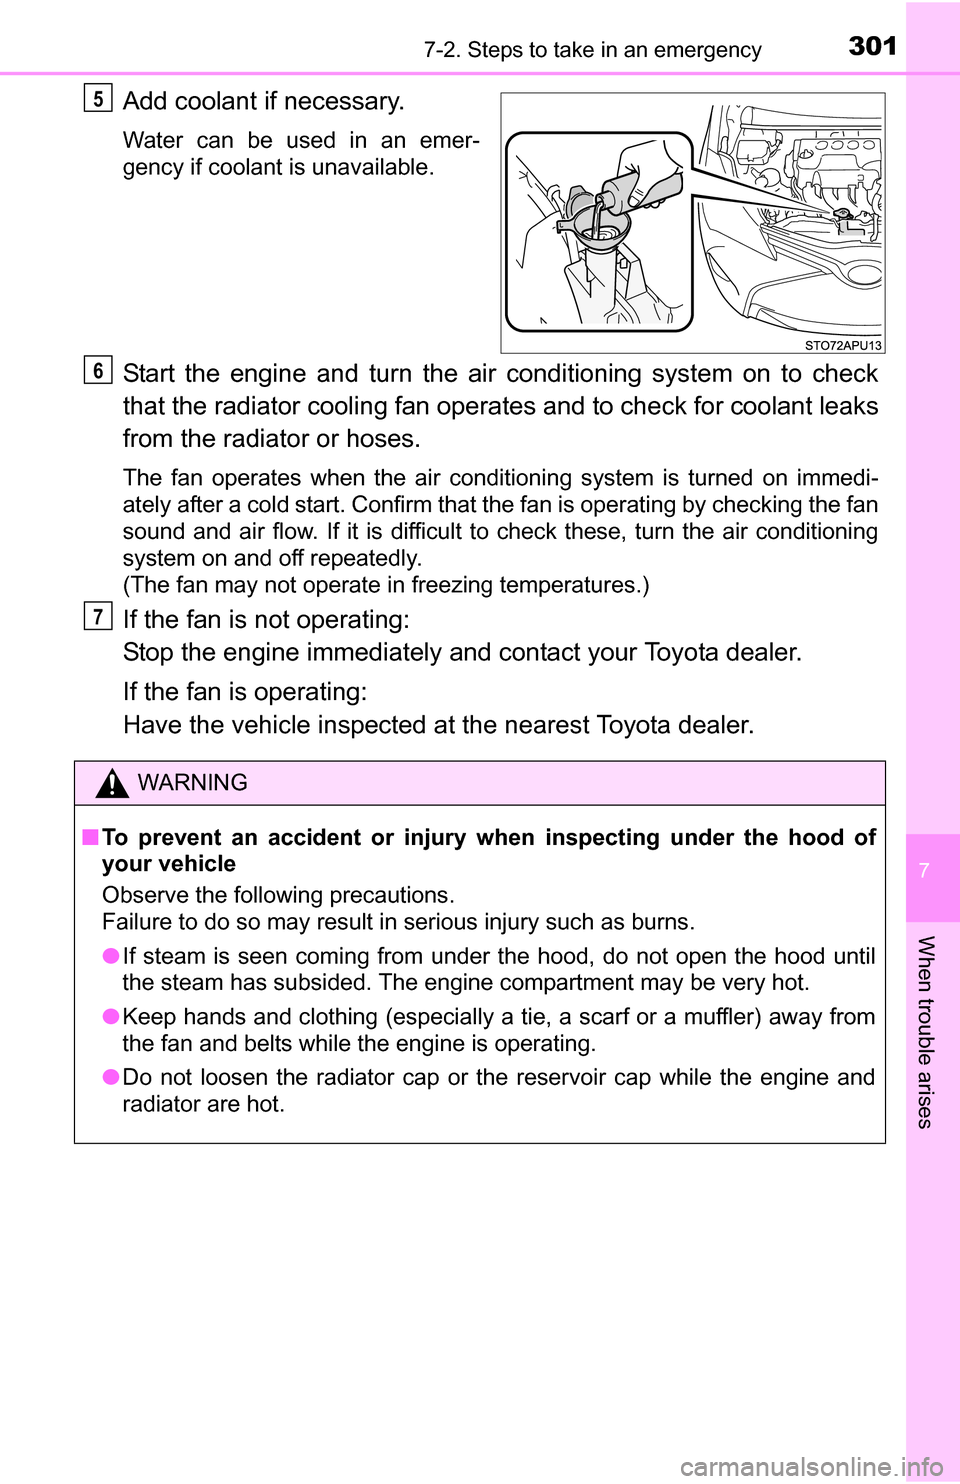 TOYOTA YARIS 2016 3.G Owners Manual 3017-2. Steps to take in an emergency
7
When trouble arises
Add coolant if necessary.
Water can be used in an emer-
gency if coolant is unavailable.
Start the engine and turn the air conditioning syst